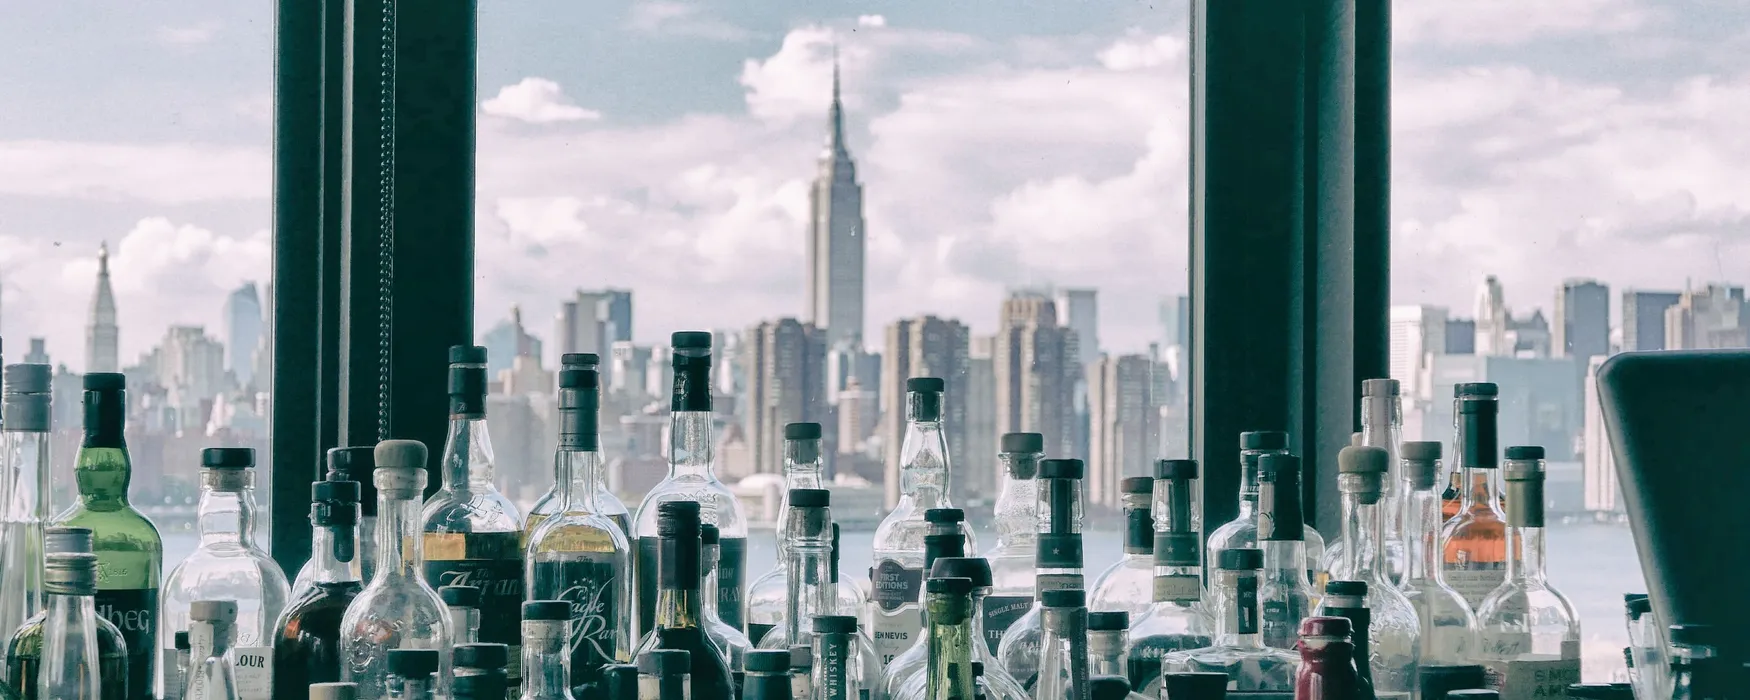 Viewnary's guide to the 3 best rooftop bars in NYC